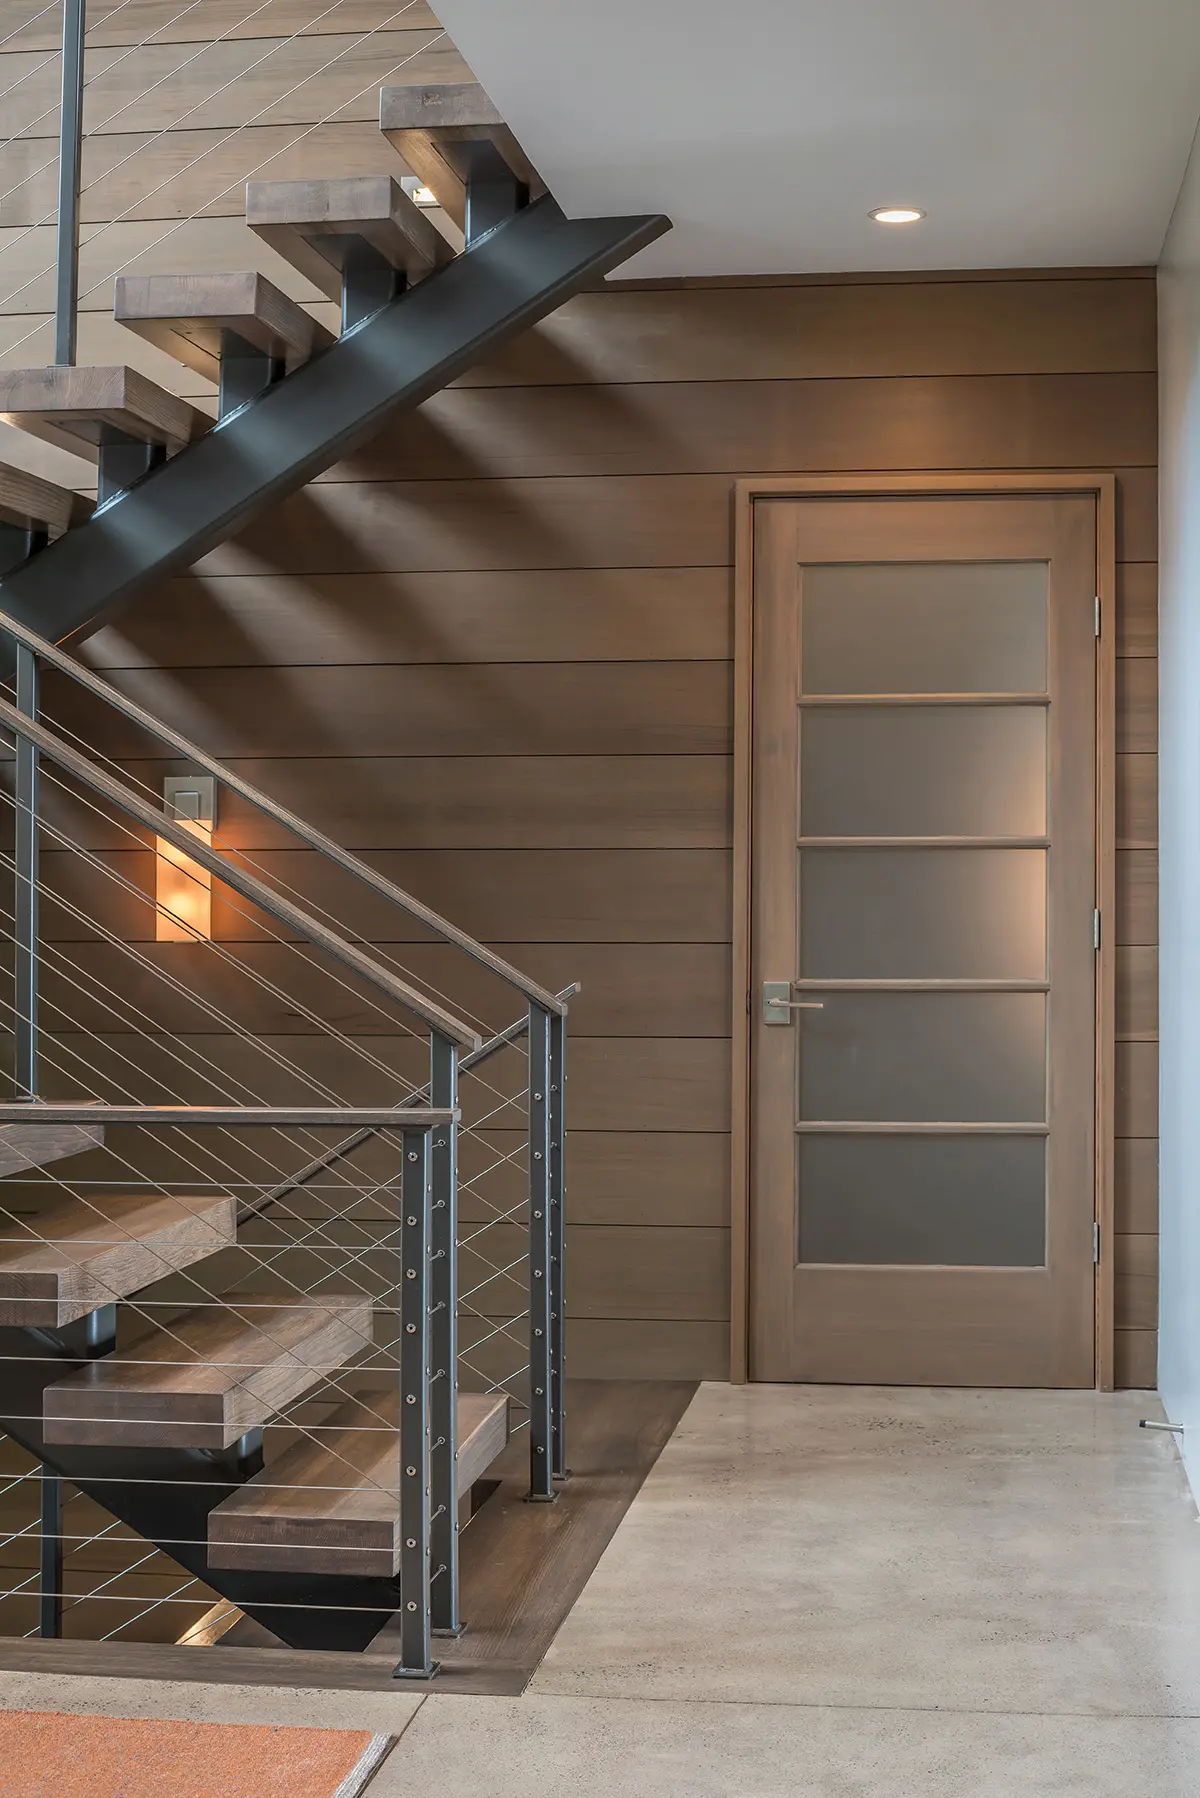 The contemporary staircase with the cabin-style paneled wall